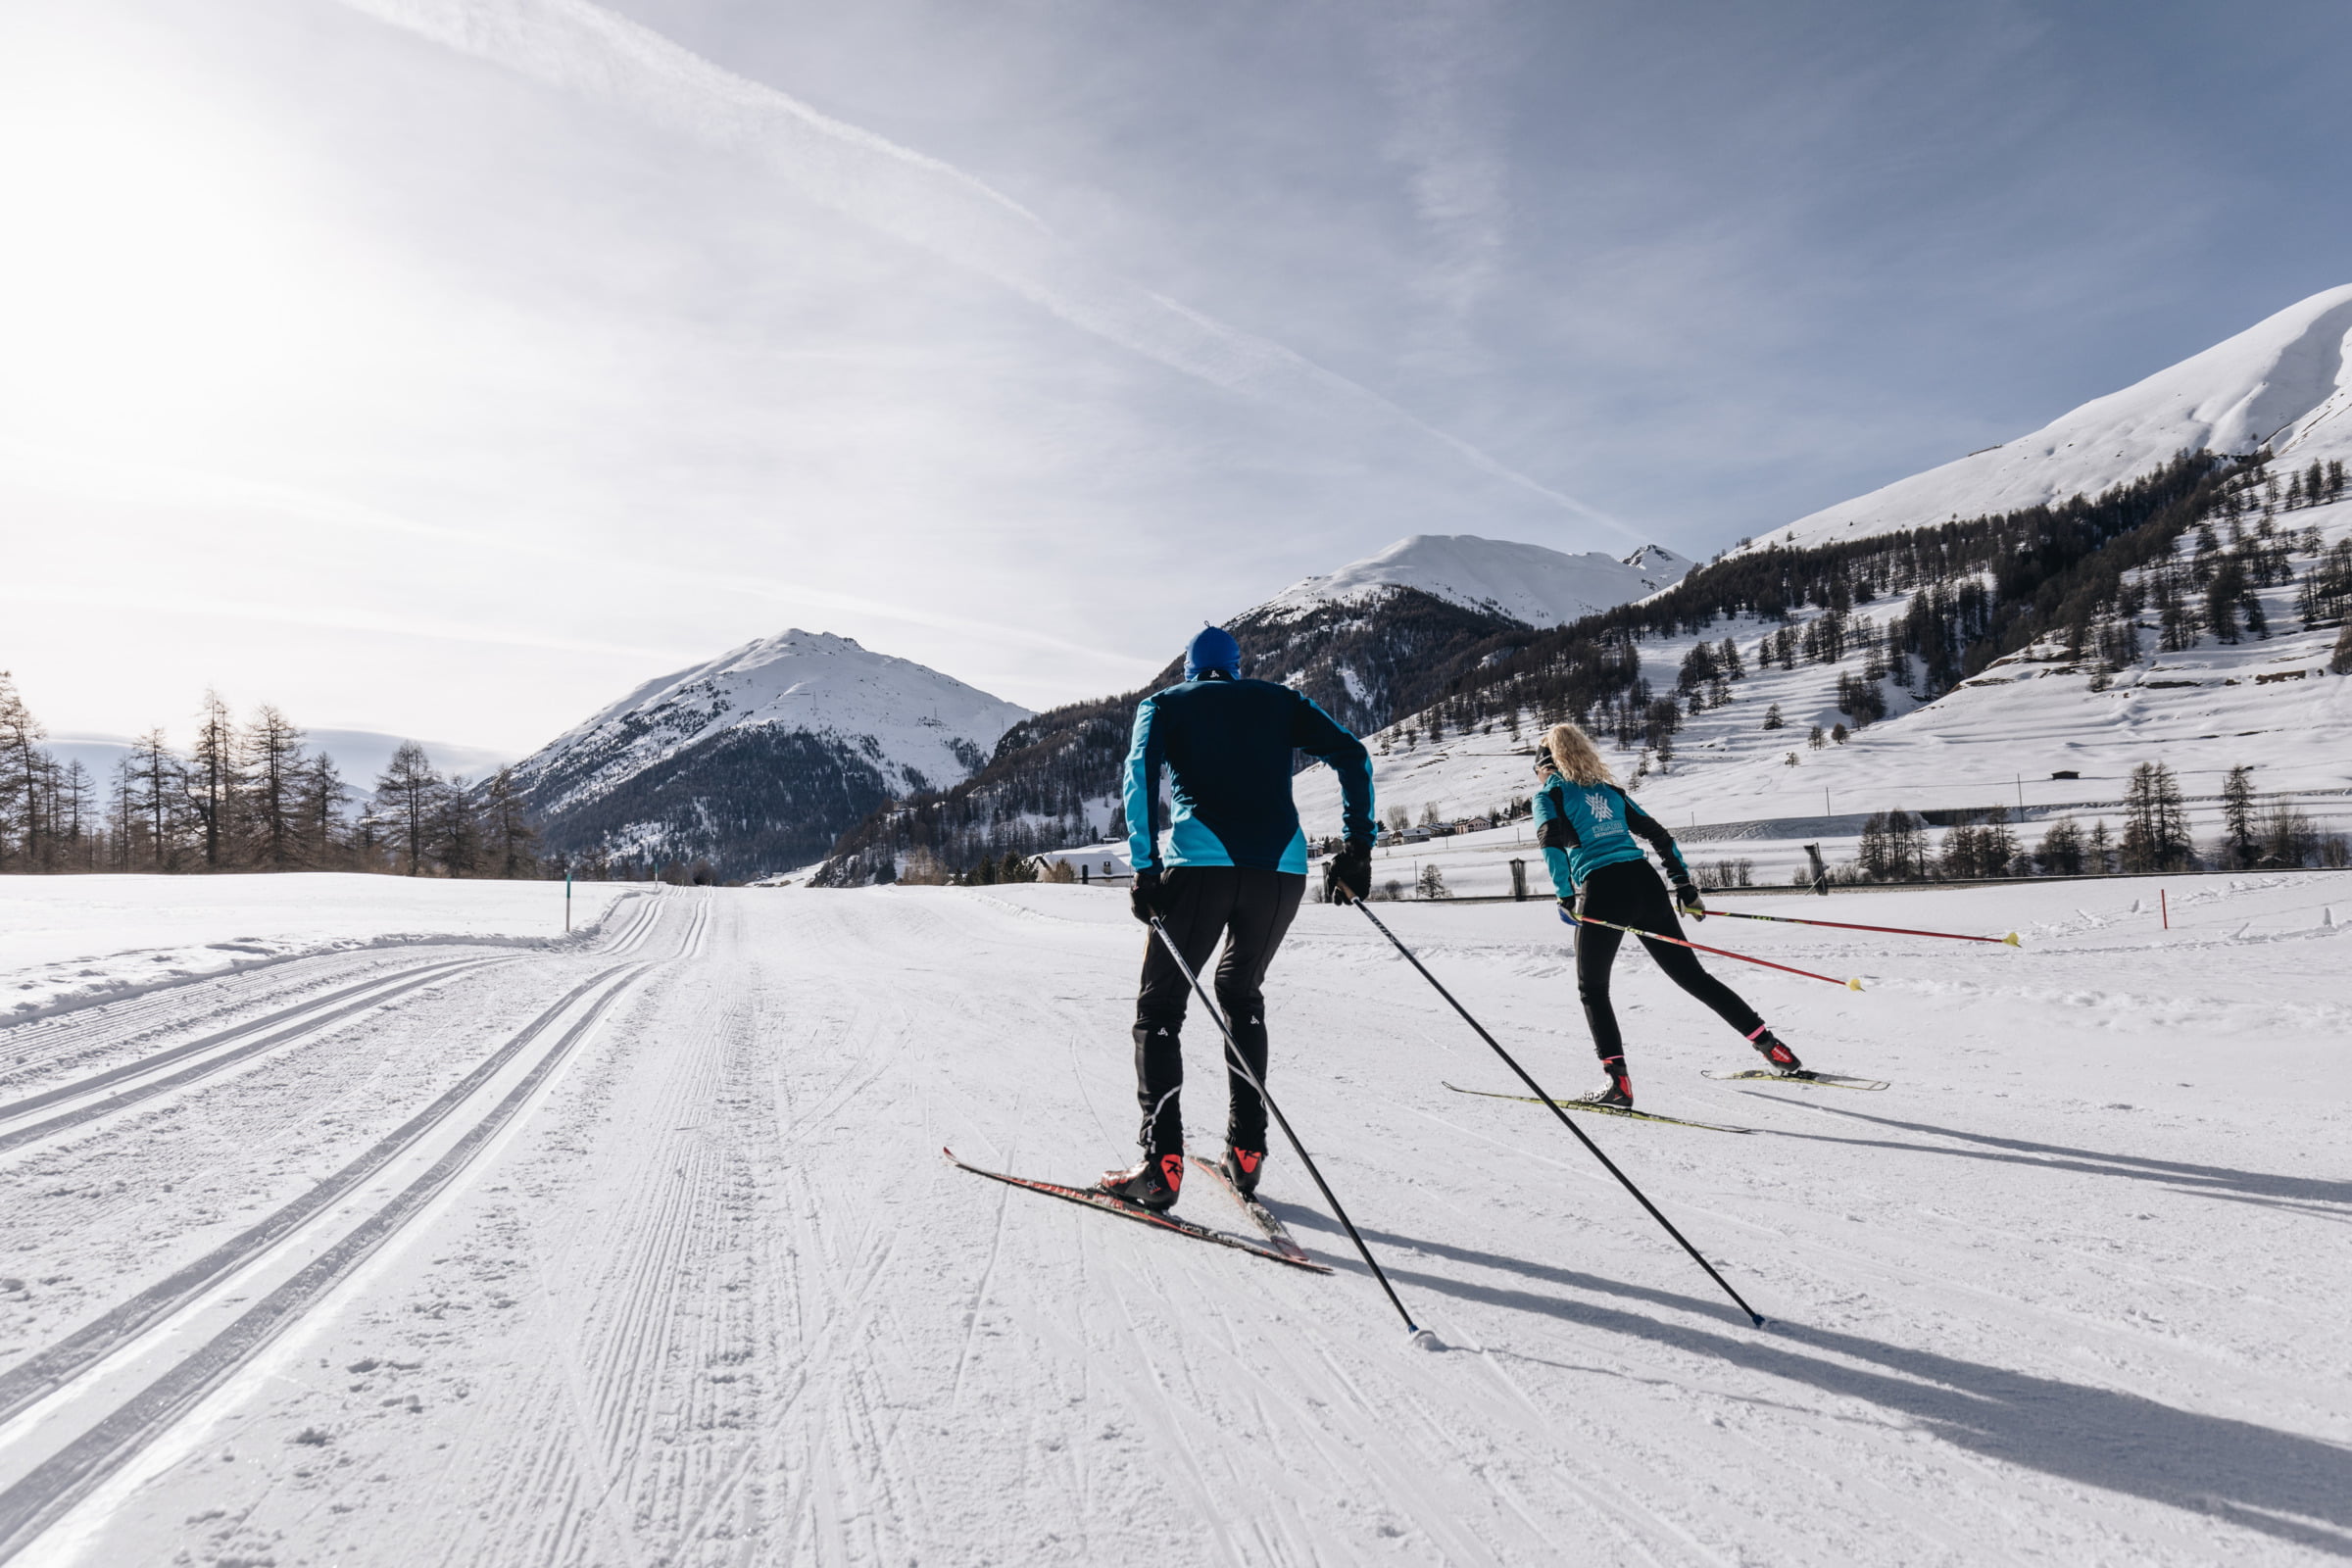 Cross country skiing in the “heart” region